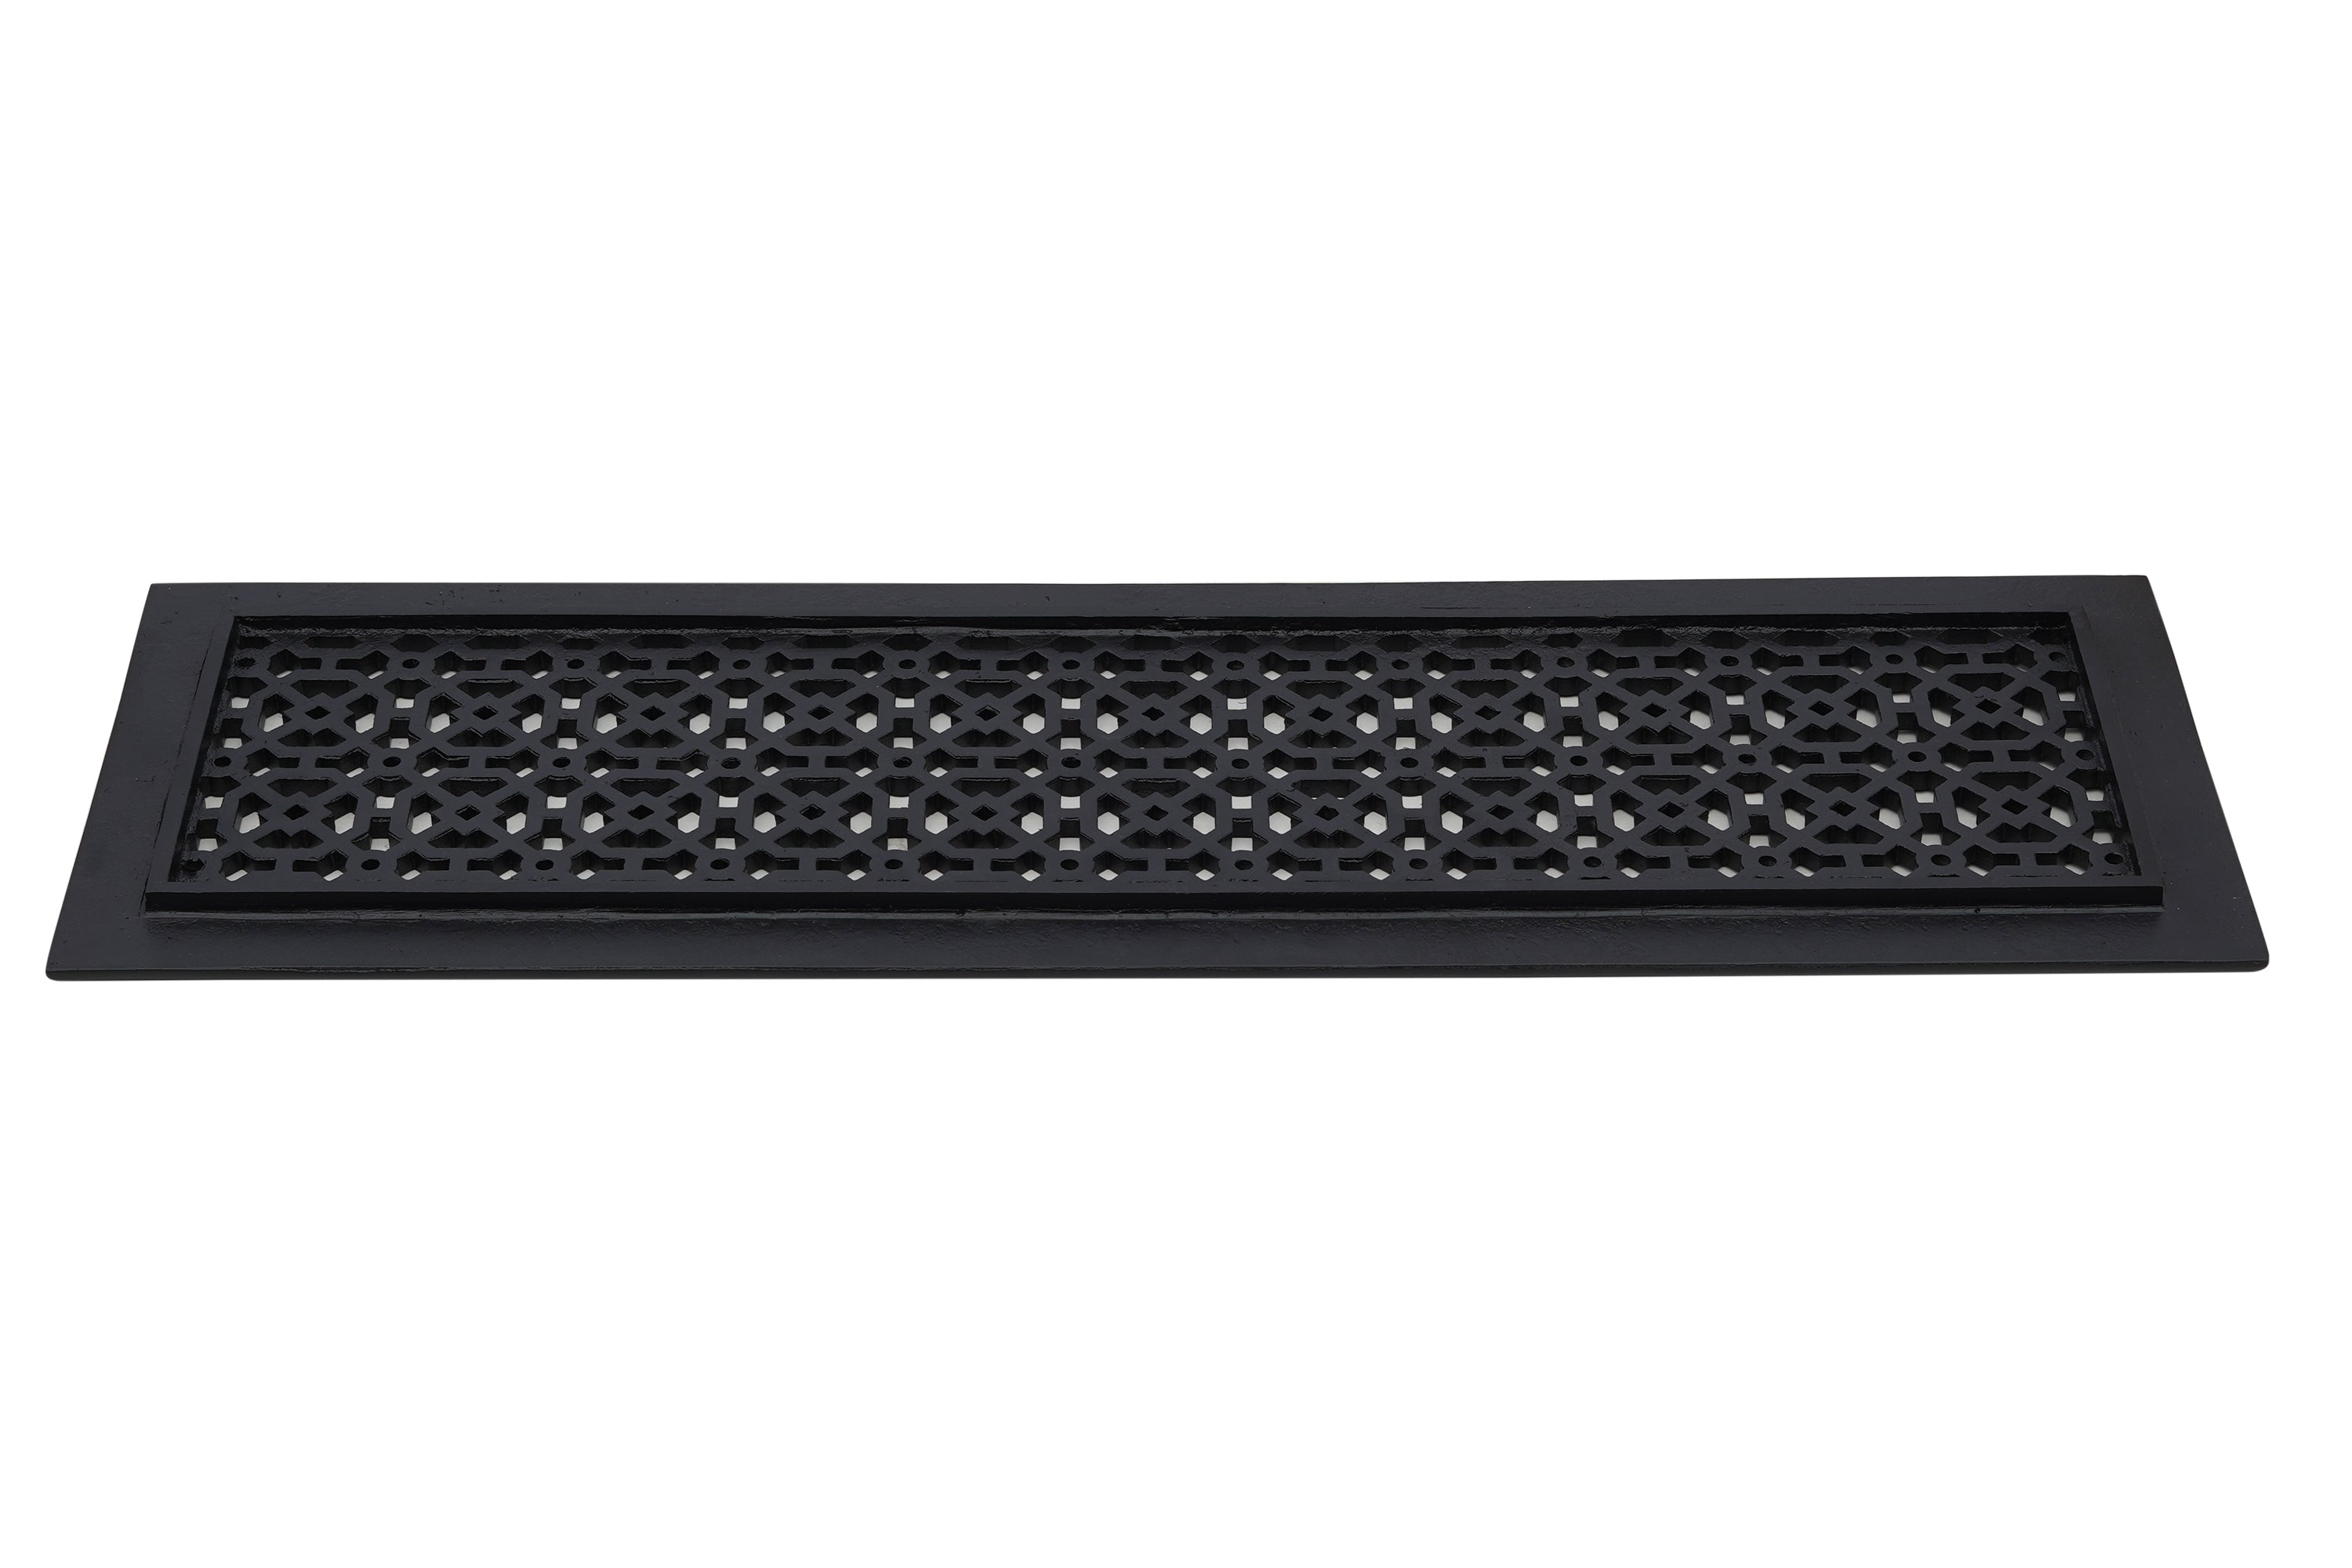 Achtek AIR RETURN 4"x20" Duct Opening (Overall Size 6"x22") | Heavy Cast Aluminum Air Grille HVAC Duct || Powder Coated